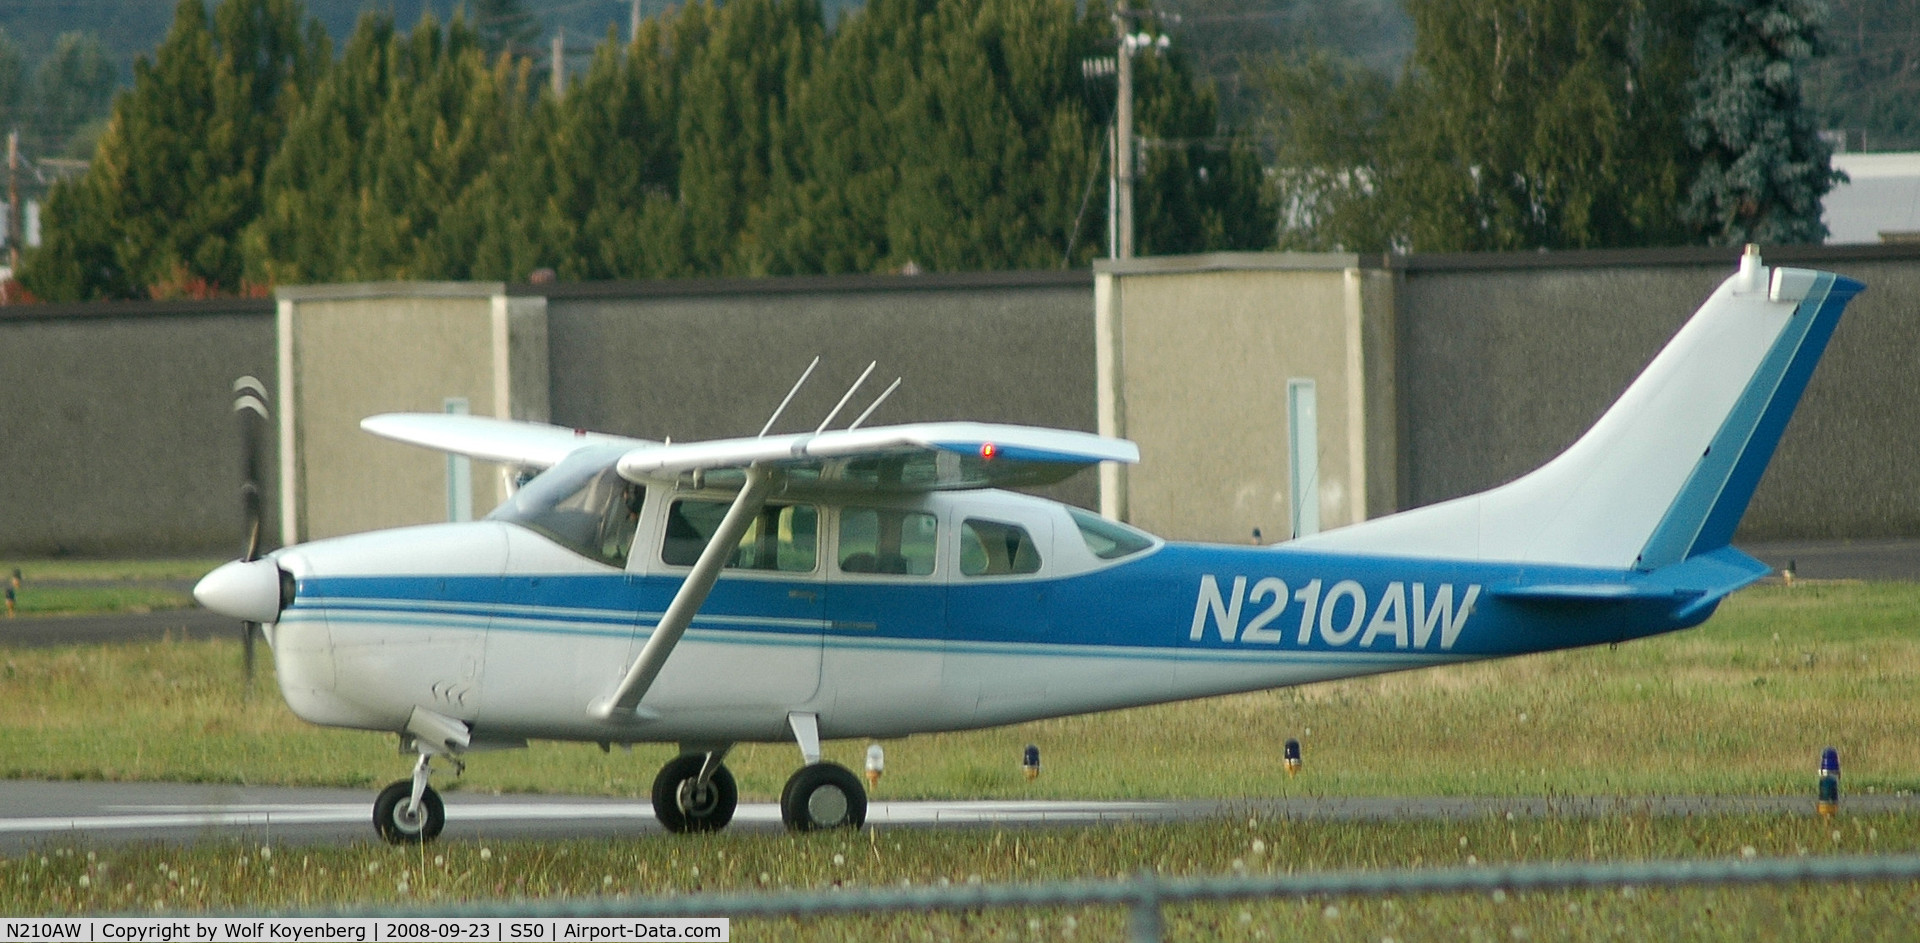 N210AW, 1964 Cessna 210D Centurion C/N 21058492, Rolling towards the active